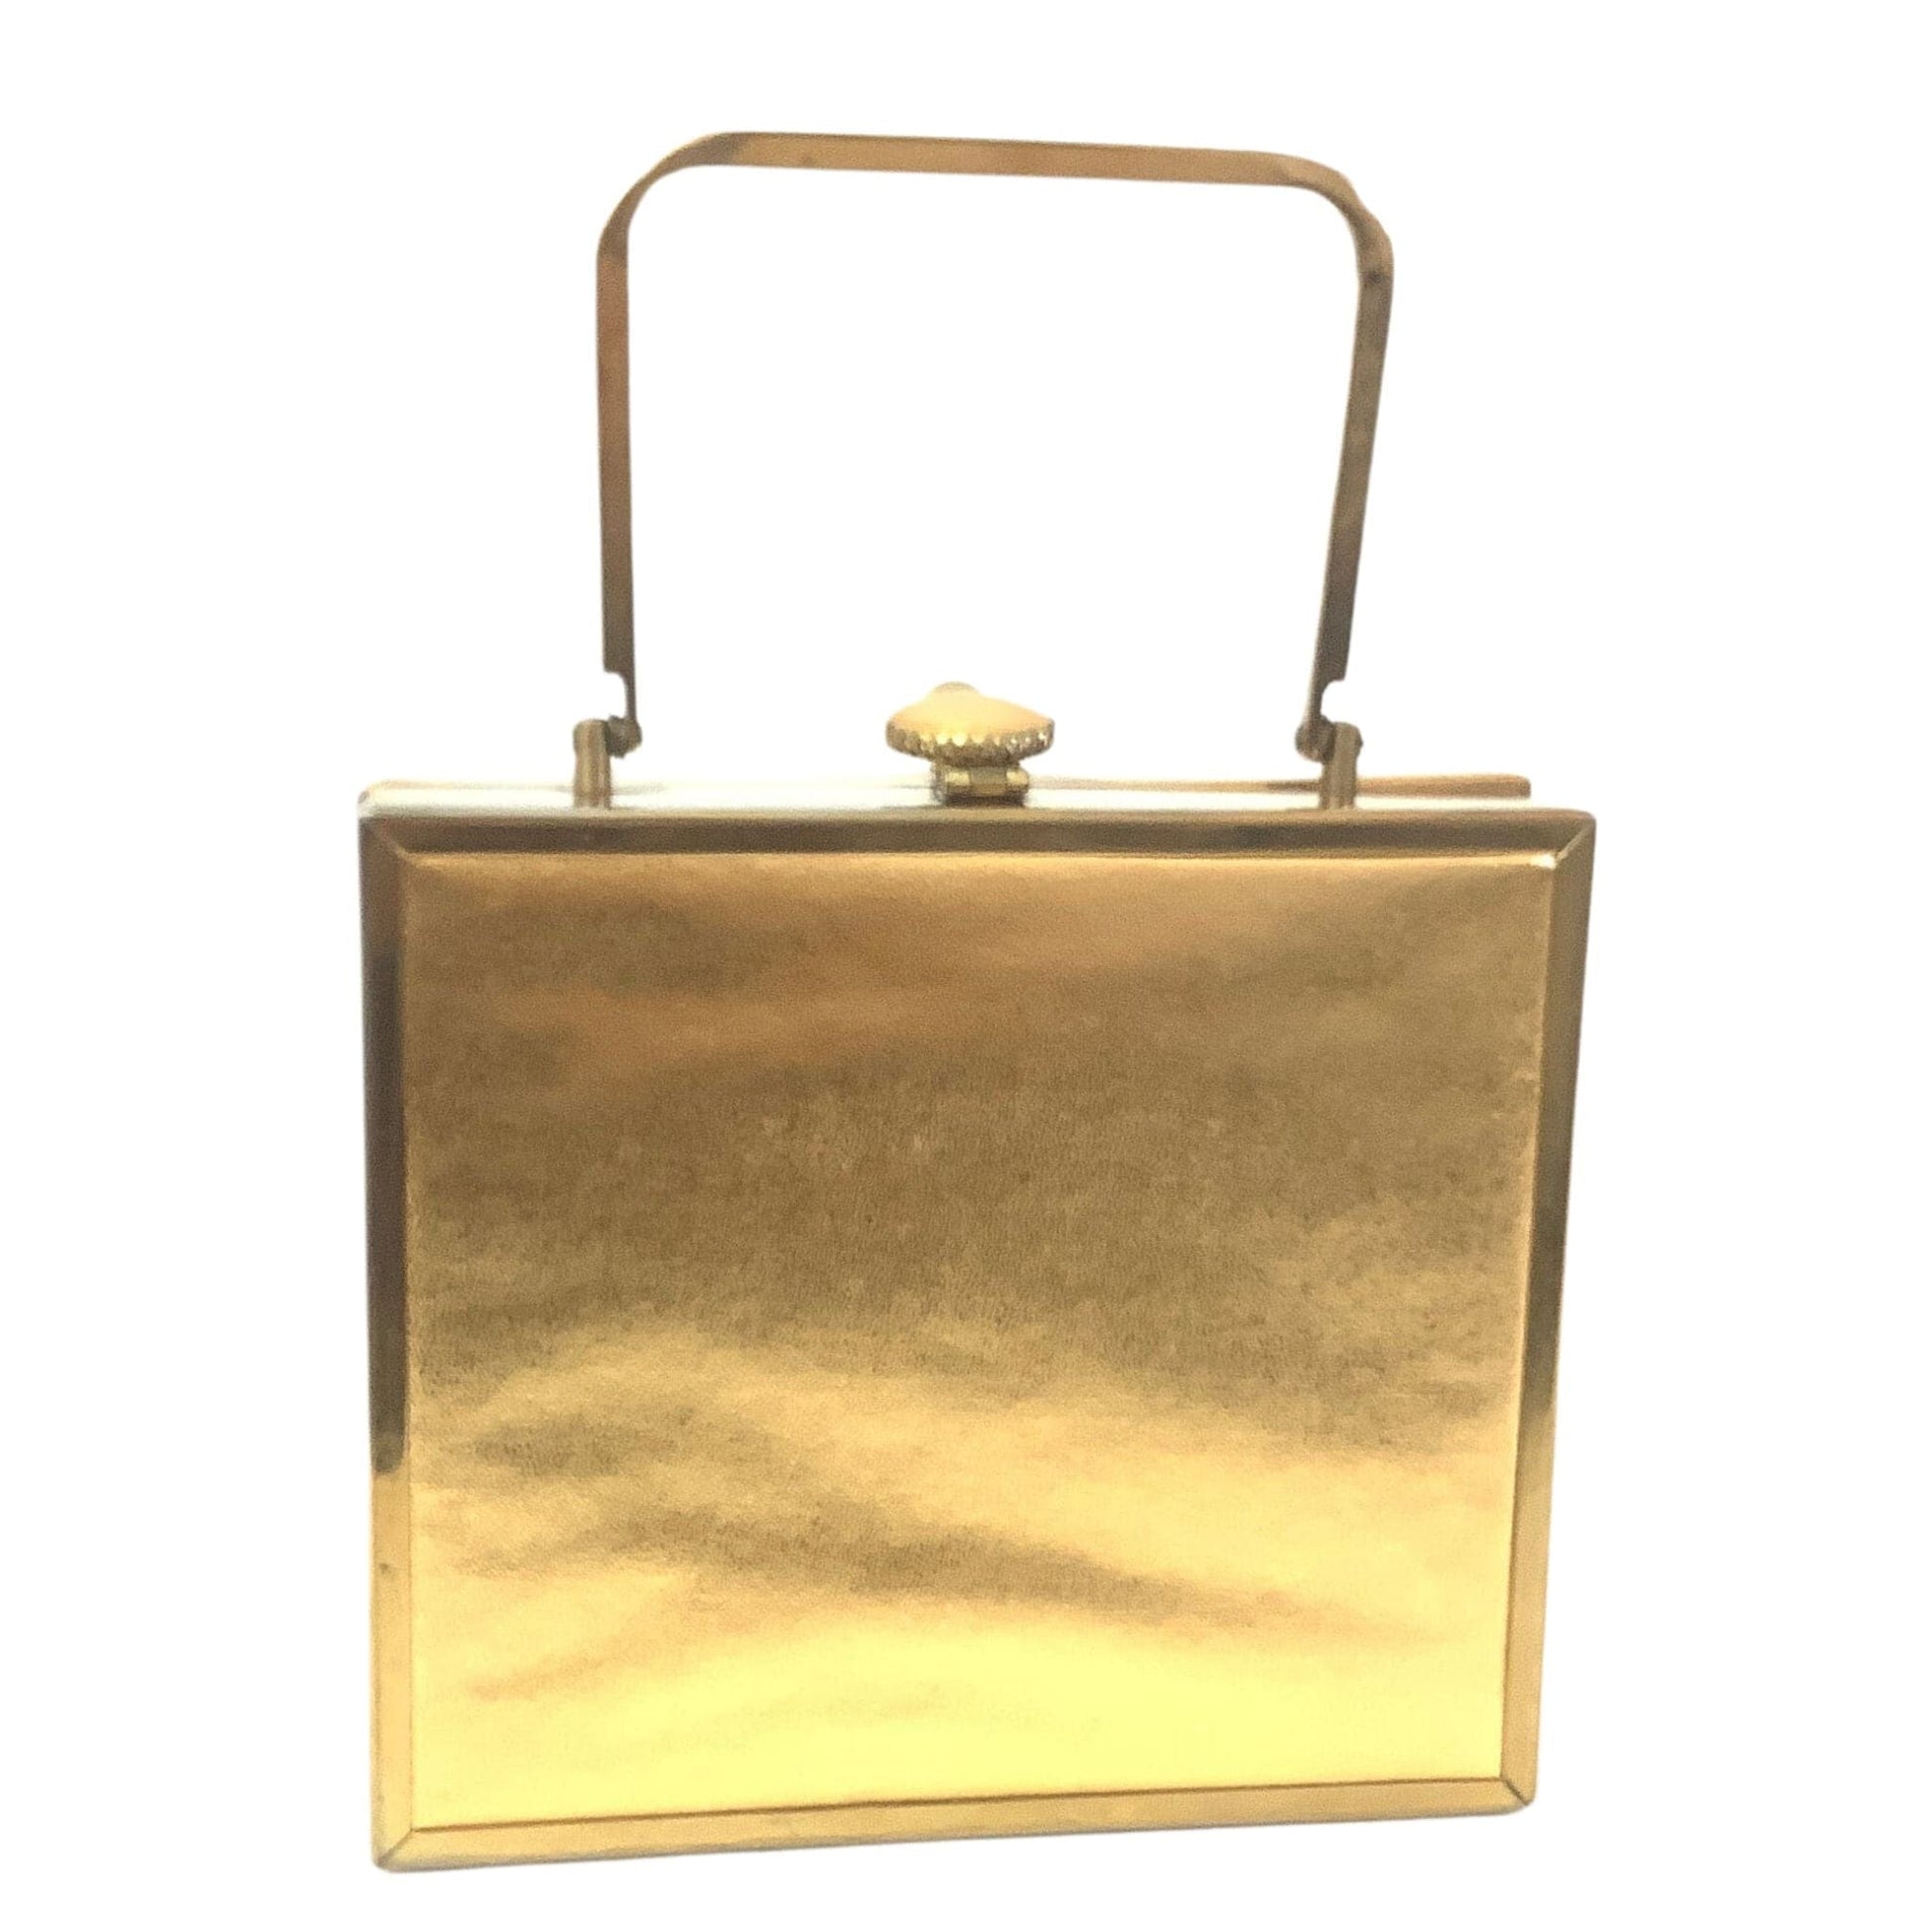 Tyrolean Gold Purse Gold / Man Made / Vintage 1960s